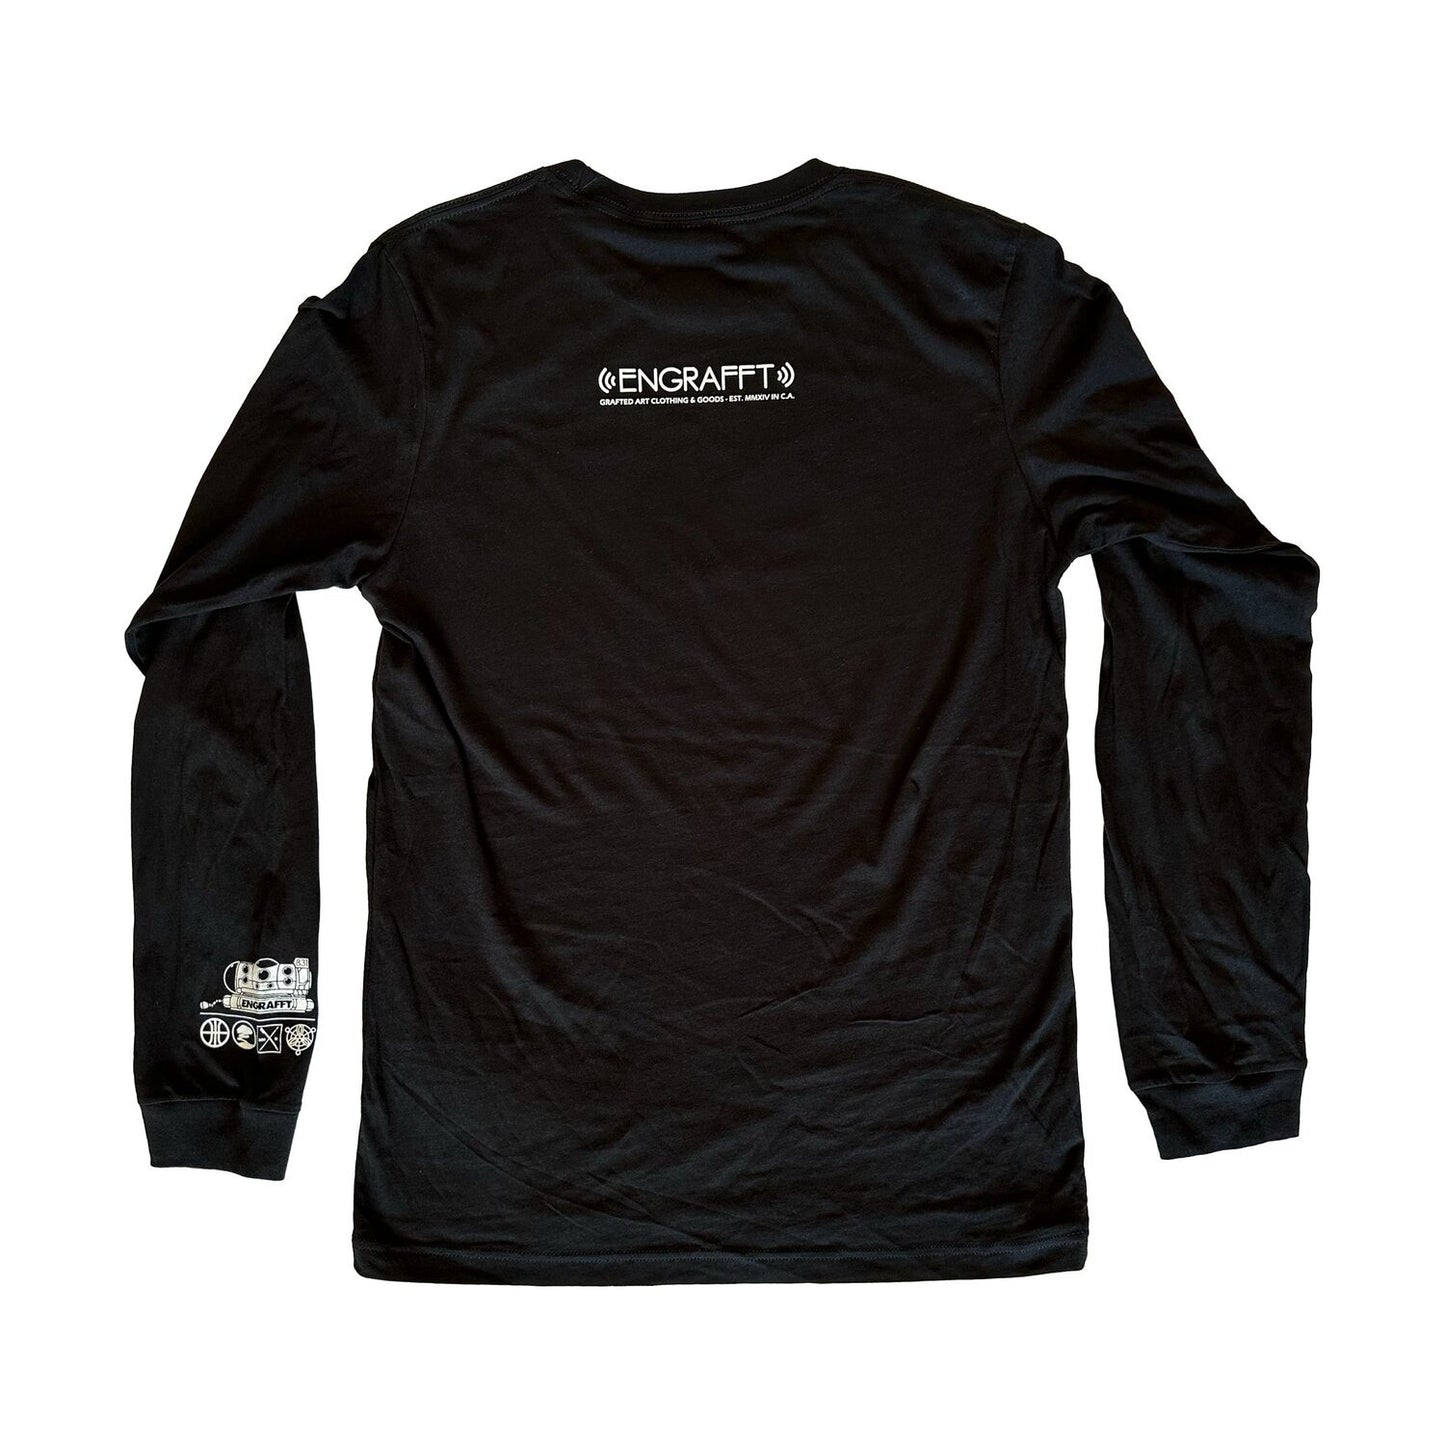 ENGRAFFT - The Whalesong Wavelength L/S Tee